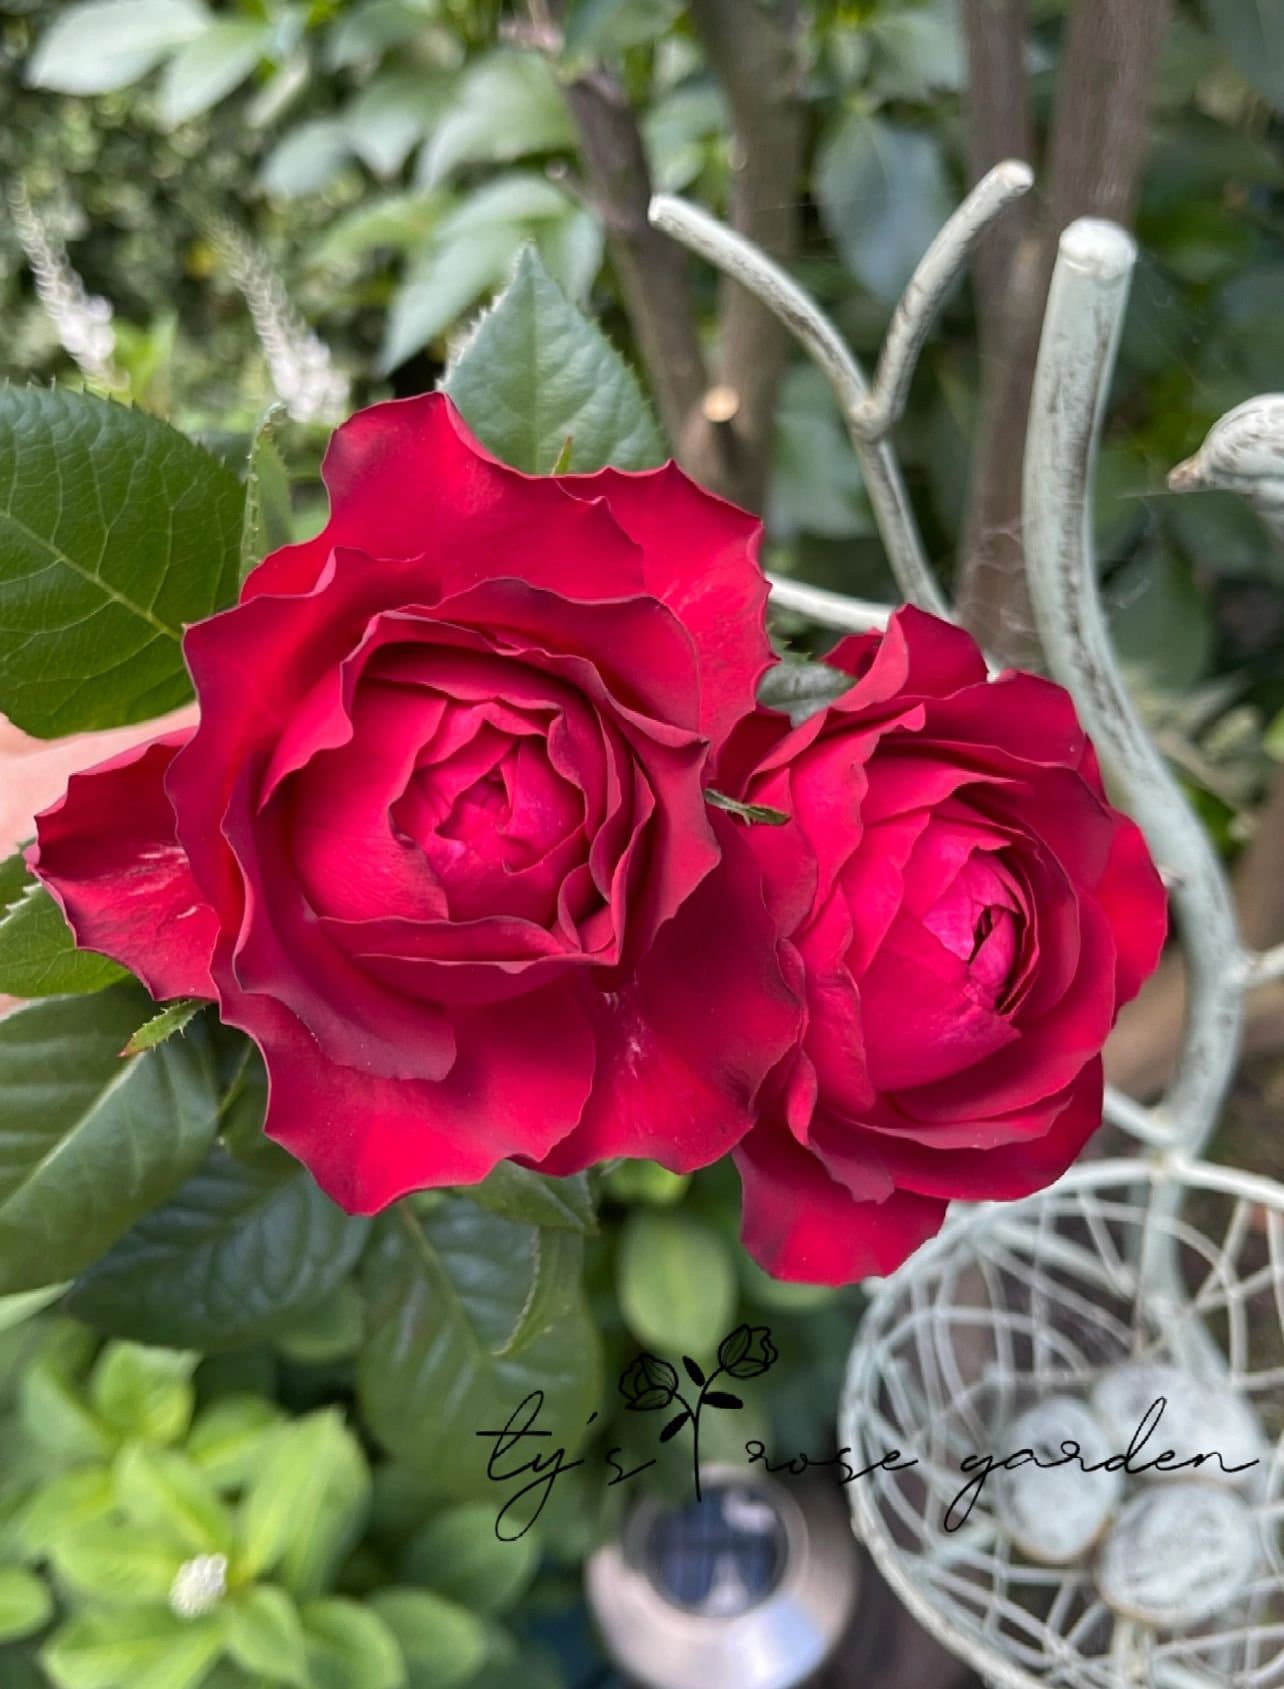 Red Rose【Dracula's Kiss| ドラキュラの吻】-1 Gal OwnRoot| New Variety 2019| Velvet Petals| 吸血鬼之吻| Red Cutting Rose| Cold Resistant| Ruffled bloom|